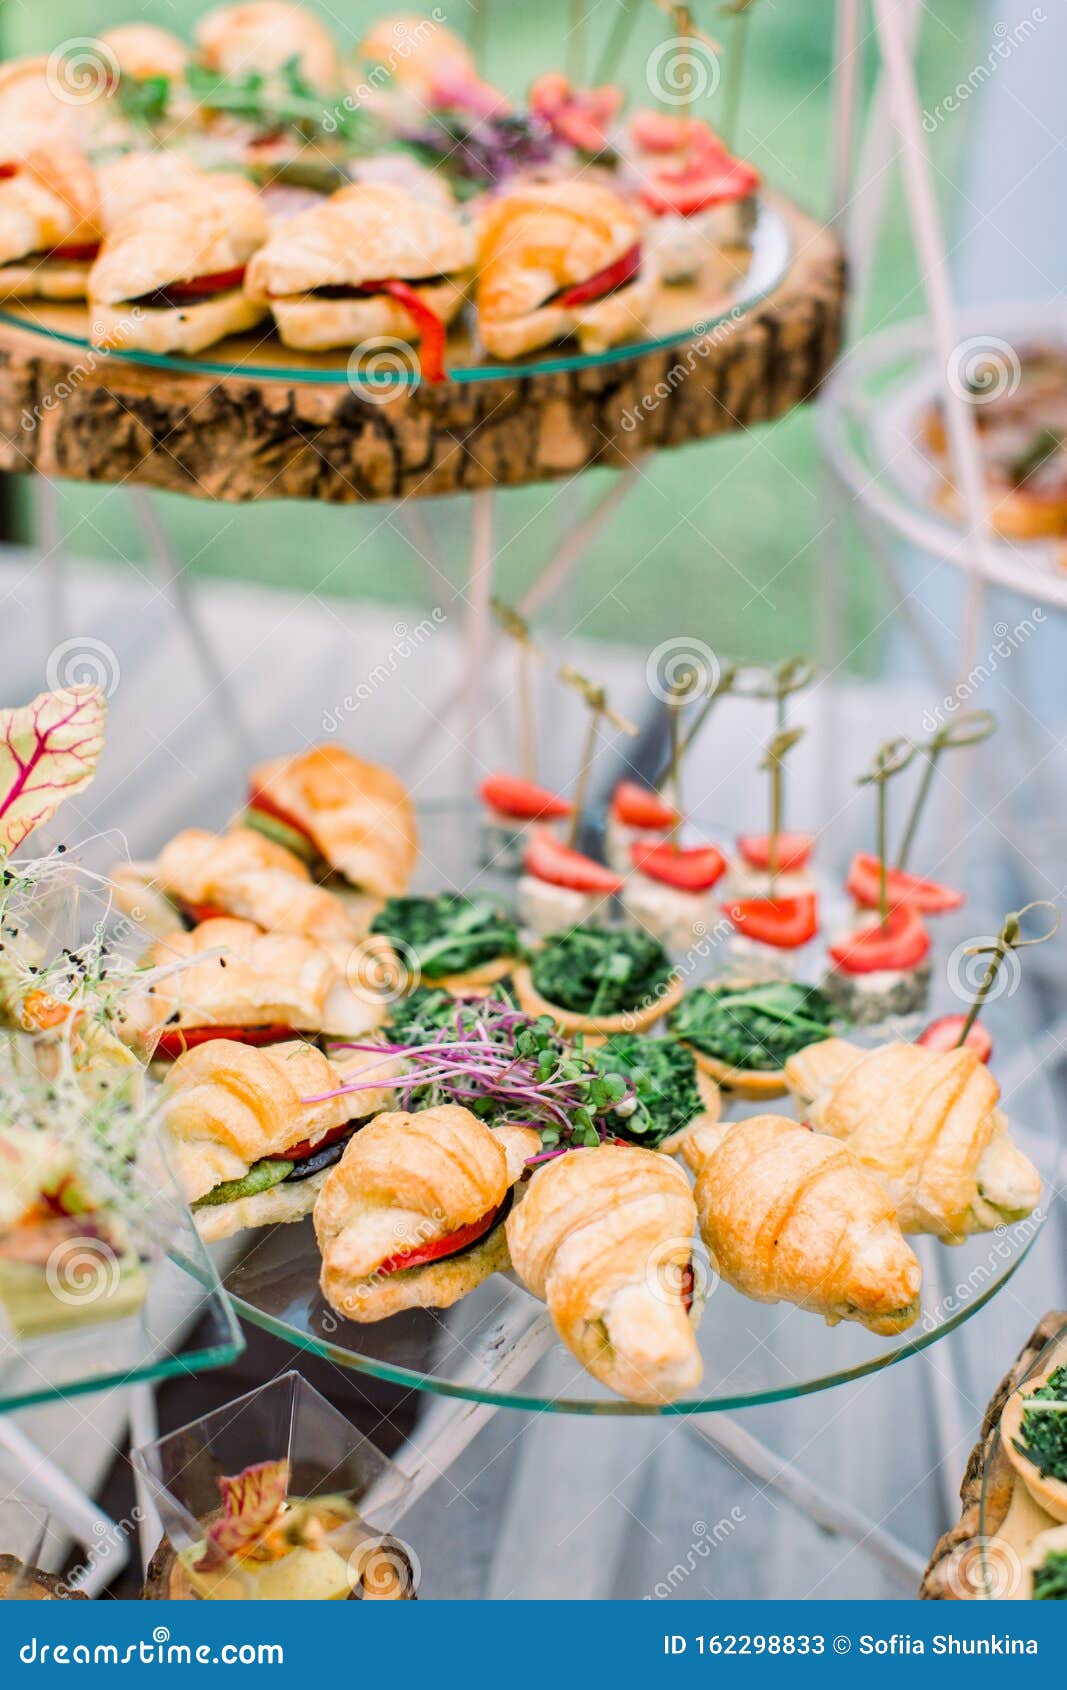 Catering Buffet and Rustic Decor, Outdoor Wedding Party with Healthy Food  Snacks Stock Image - Image of canape, catering: 162298833